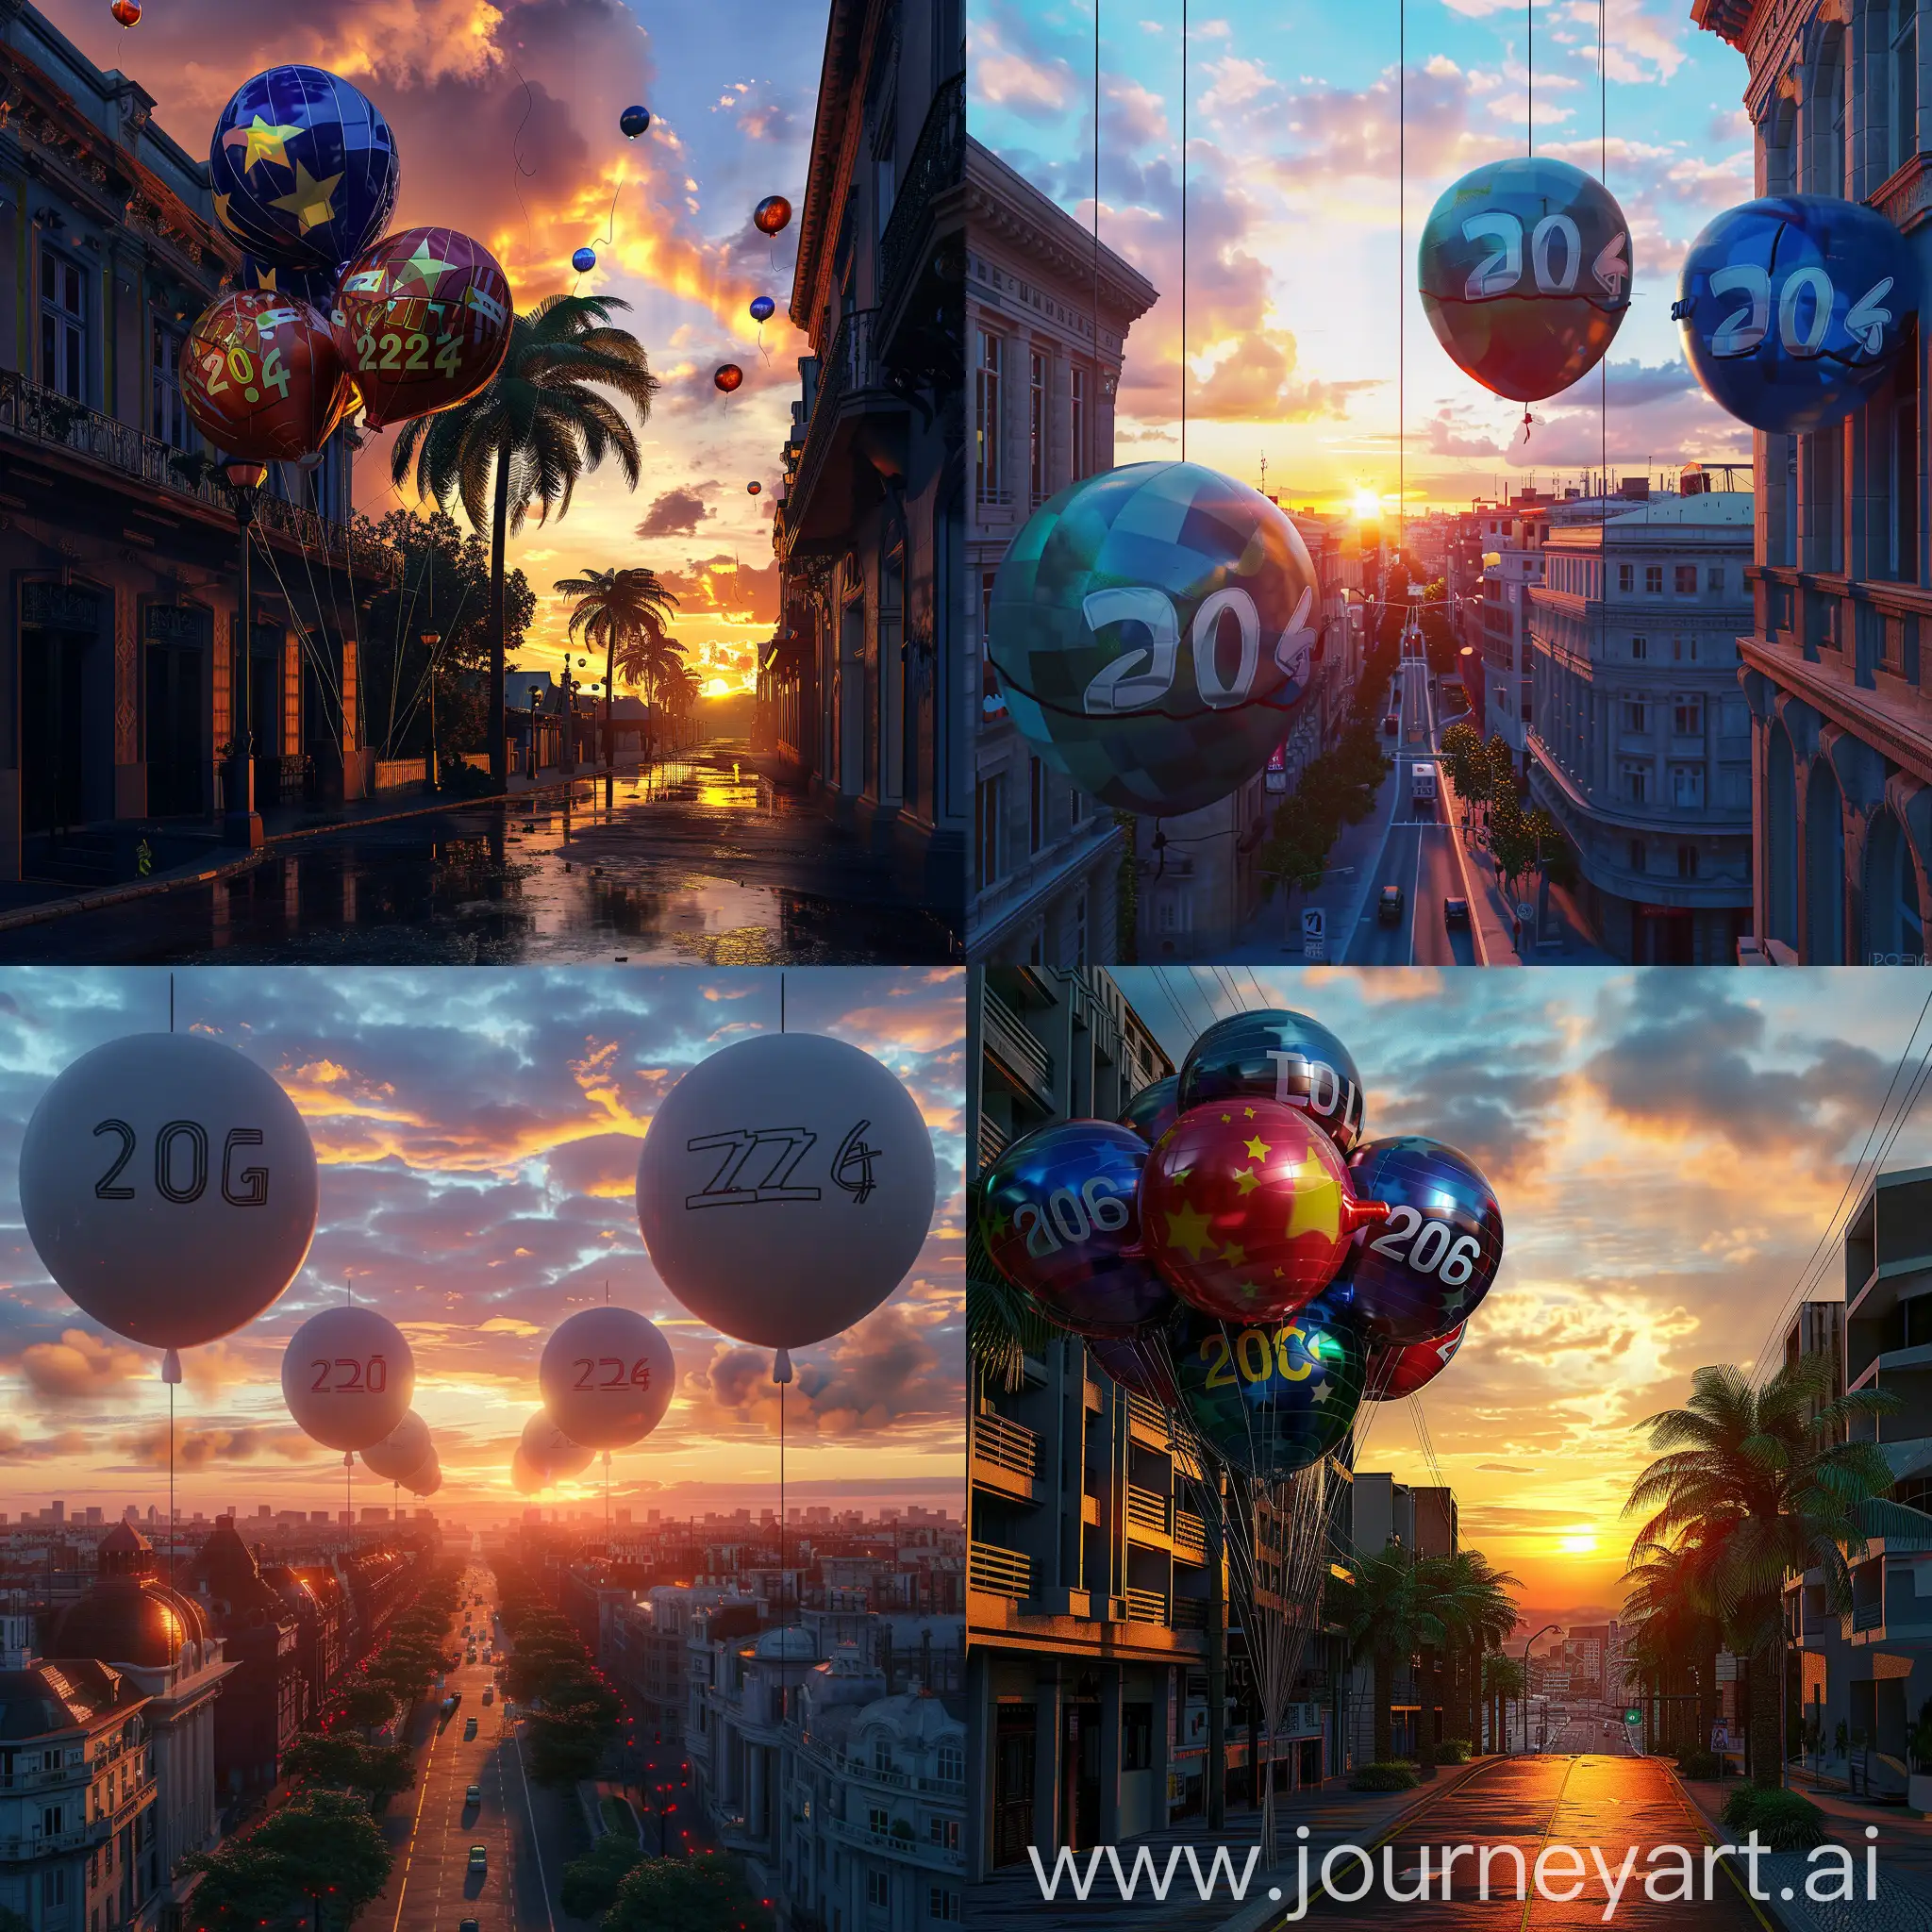 Political election themed city, street view, sunset, balloons with the year '2024' on them, realistic 